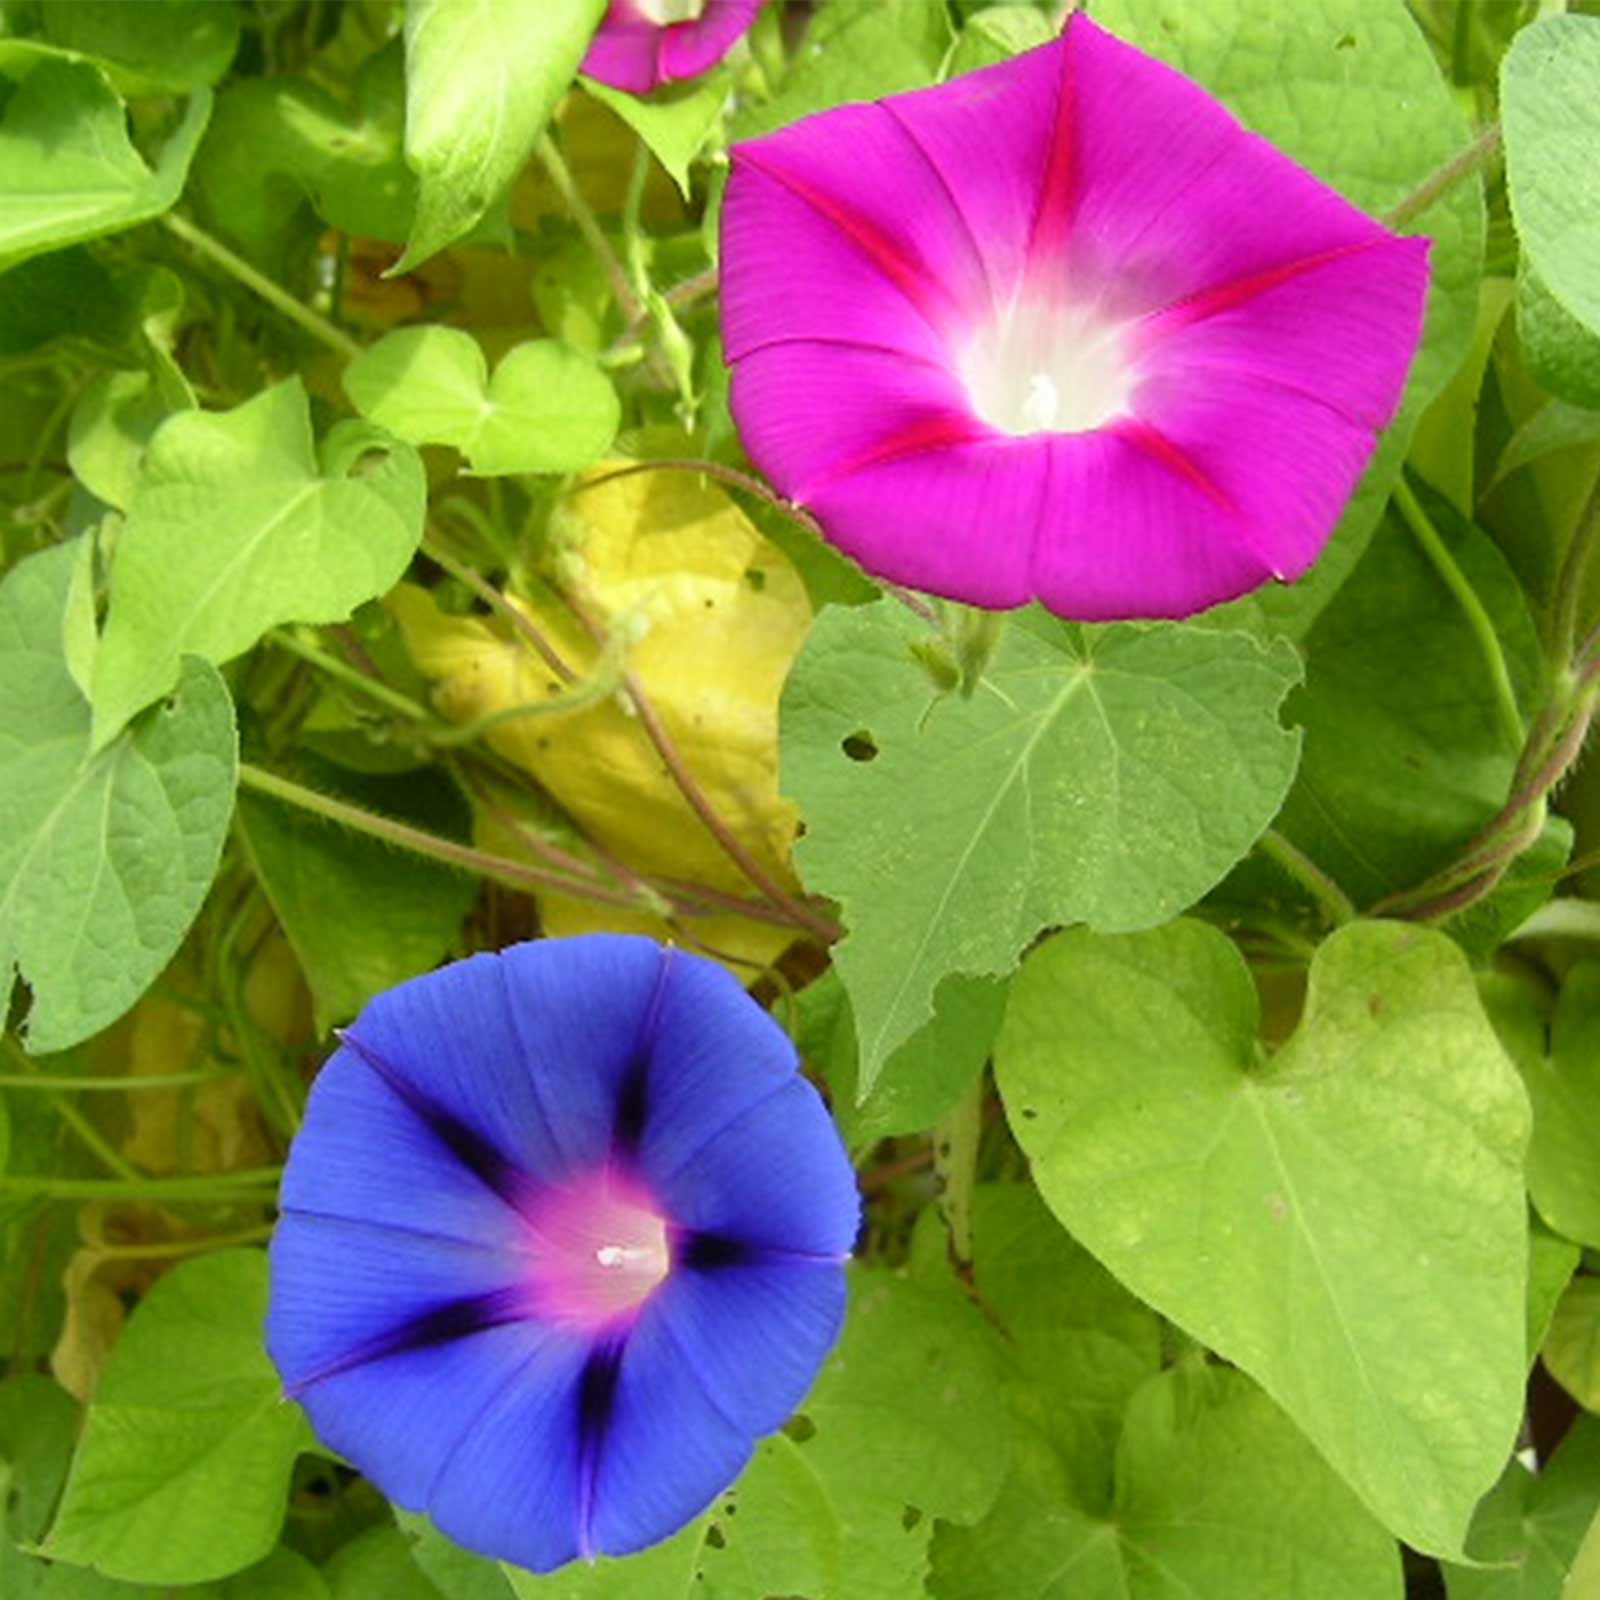 Morning Glory Flower Garden Seeds - Mixed Colors - 1 Lb - Annual Flower Gardening Seed - Ipomoea purpurea - image 1 of 2